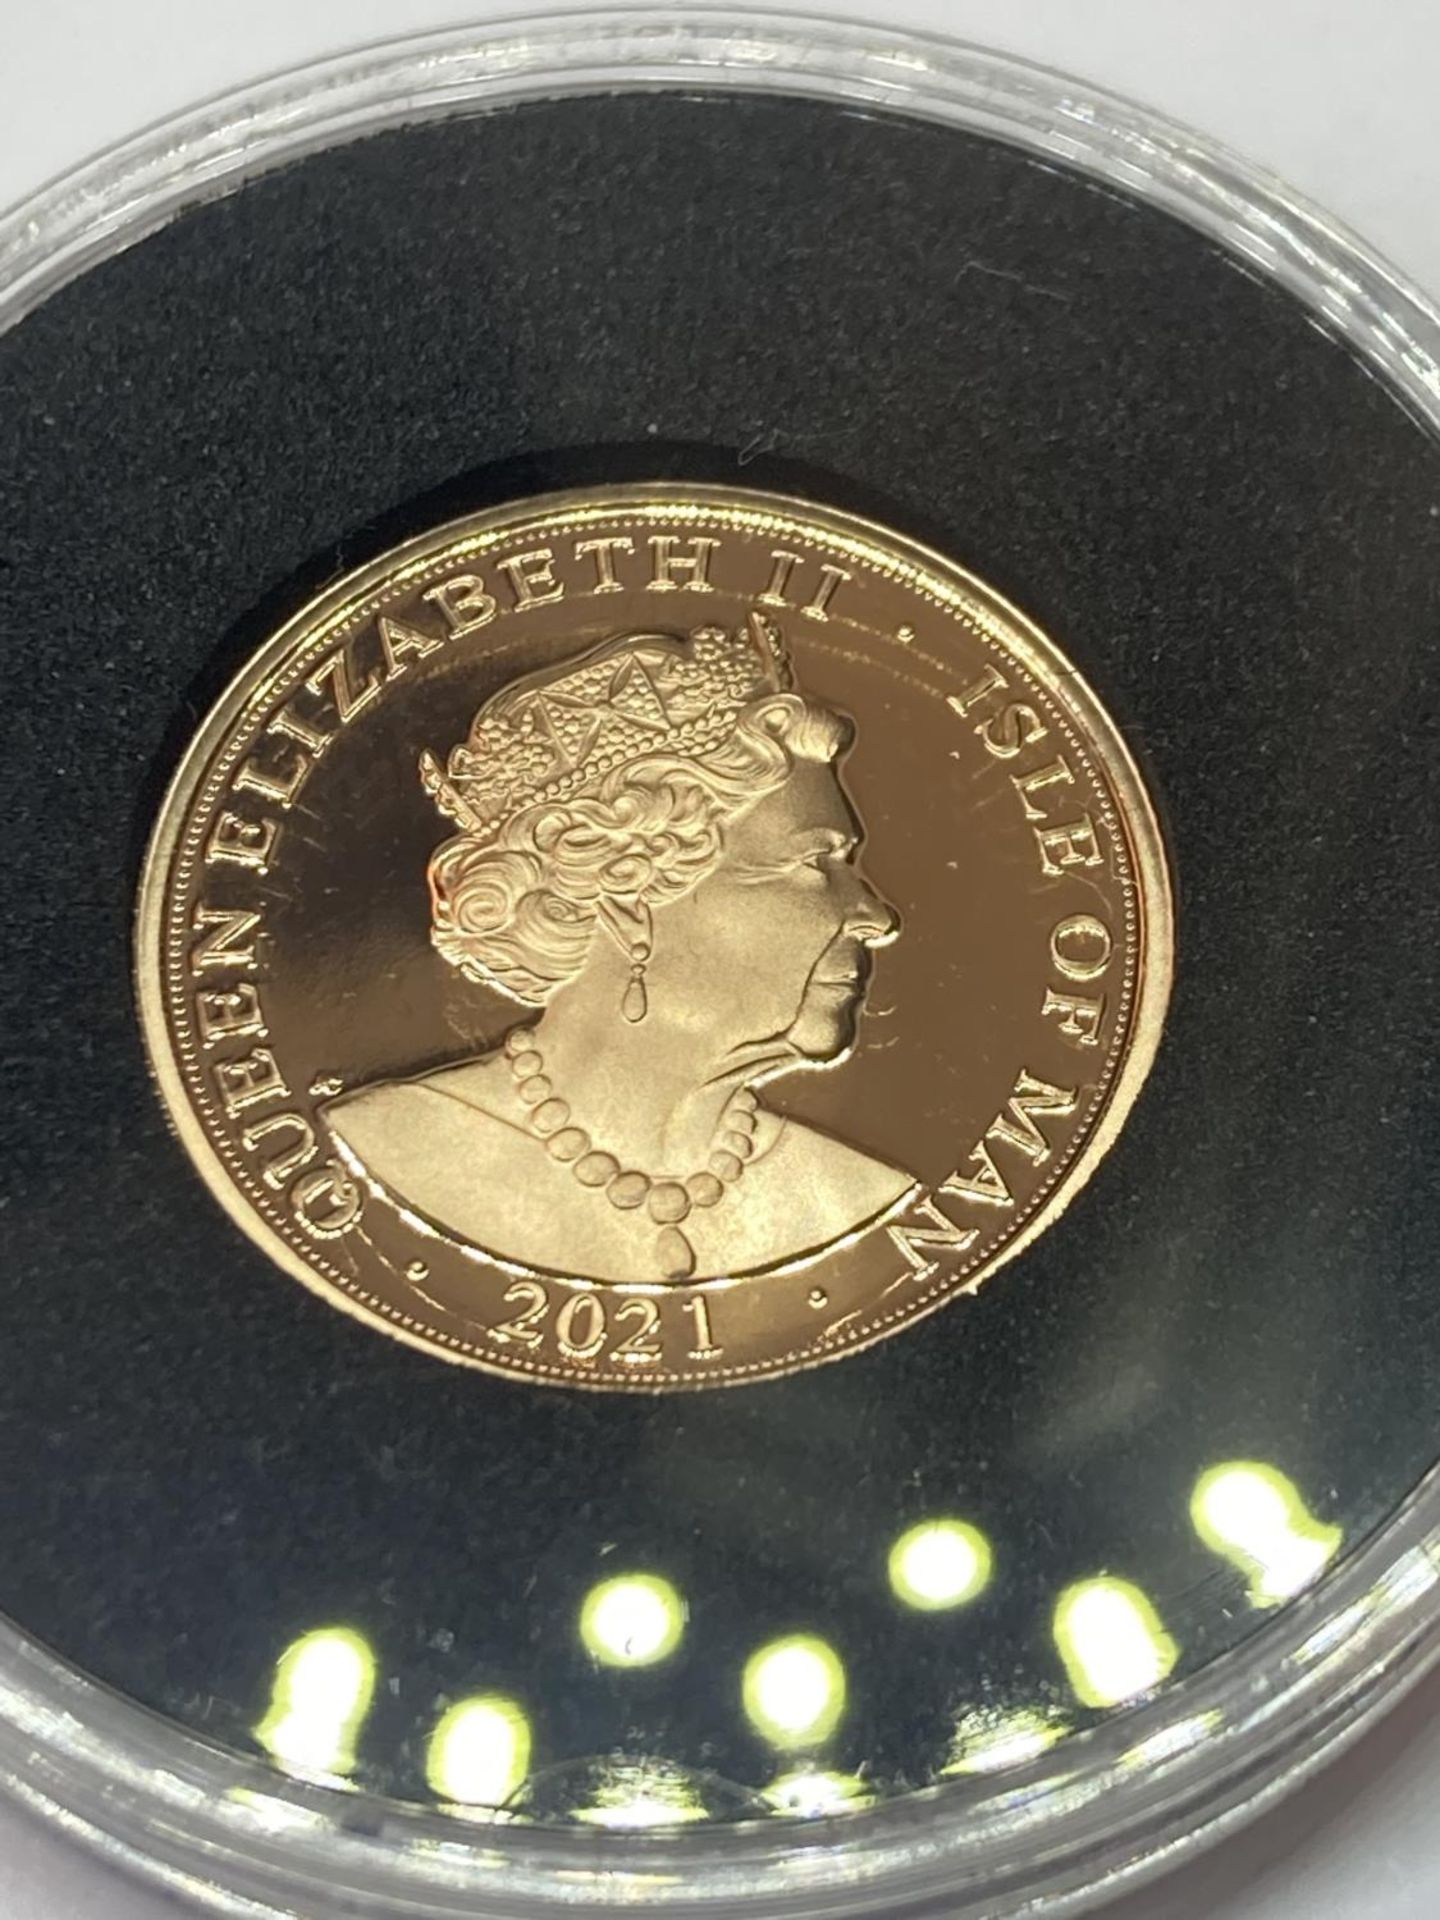 A 2021 QE2 95TH BIRTHDAY ISLE OF MAN GOLD PROOF SOVEREIGN LIMITED EDITION NUMBER 540 OF 995 - Bild 3 aus 4